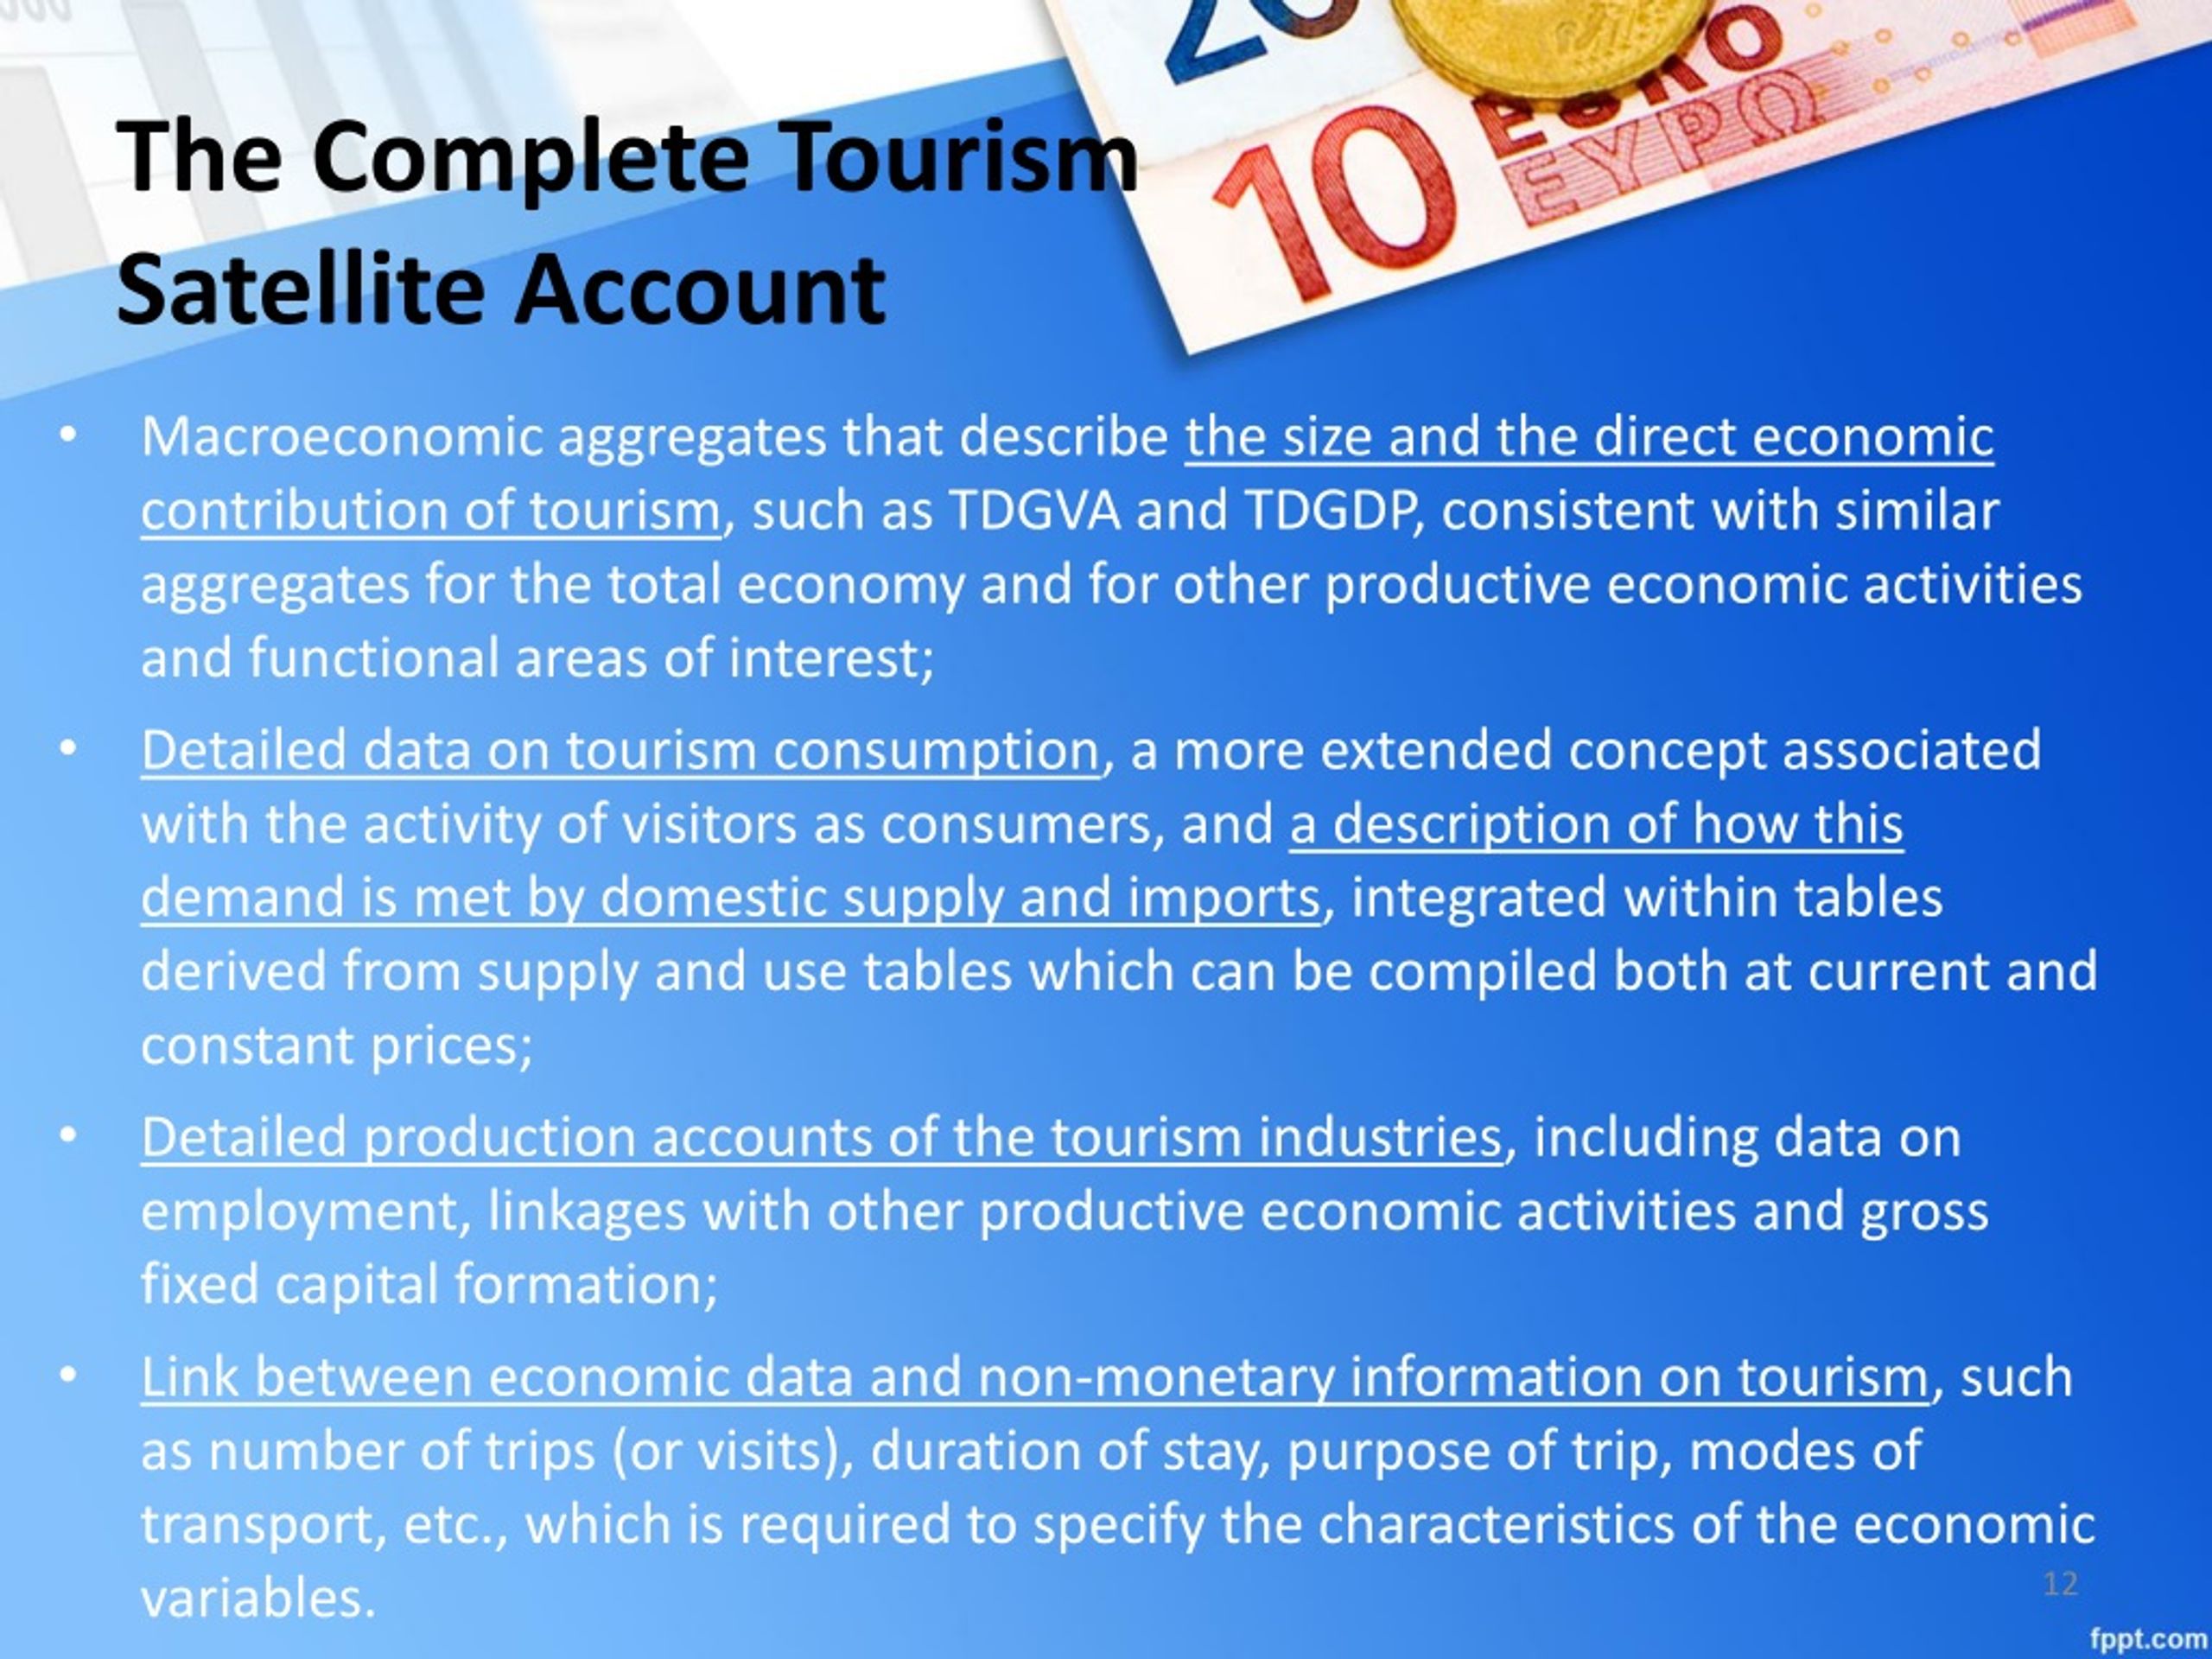 importance of tourism satellite account